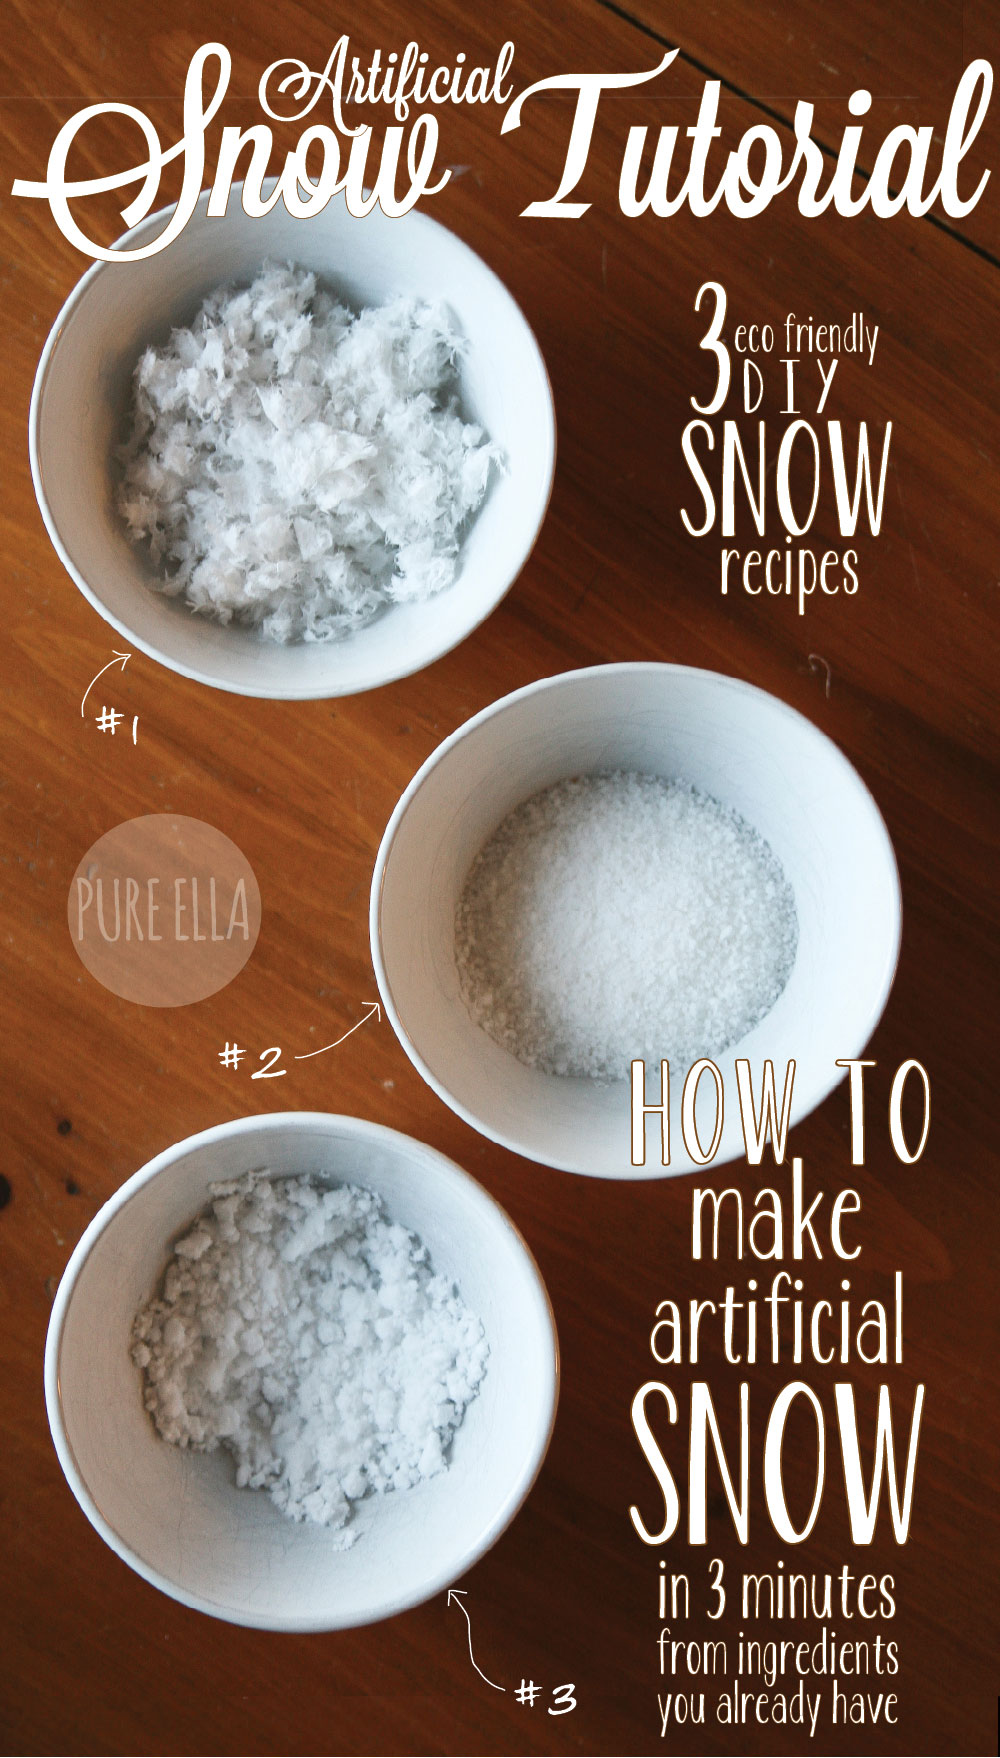 How To Make Fake Snow For Kids - we know stuff